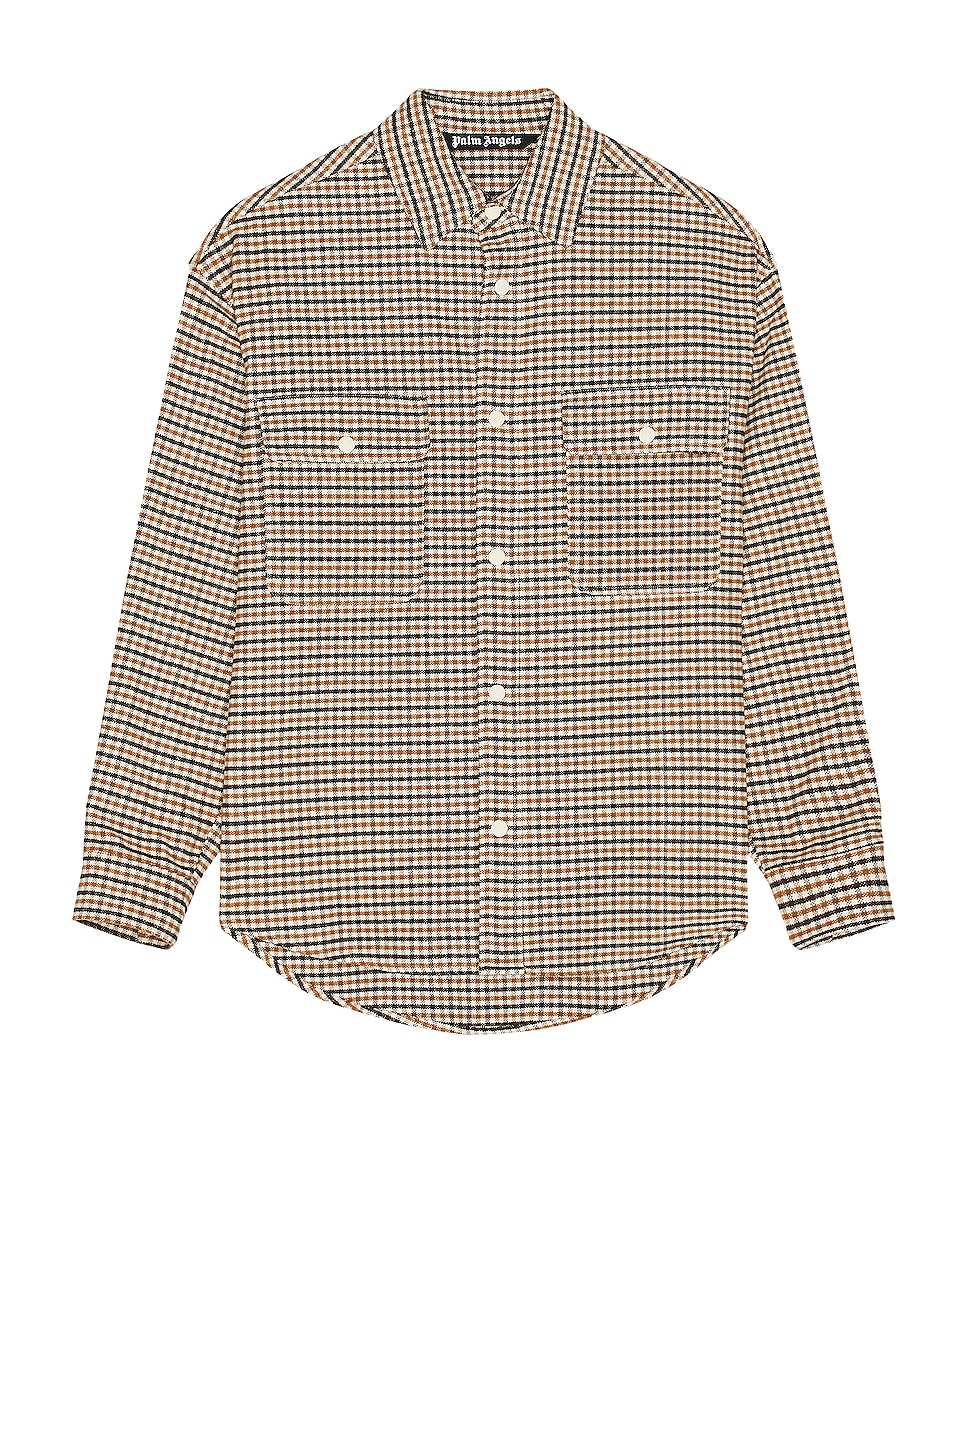 Image 1 of Palm Angels Micro Check Overshirt in Brown Black